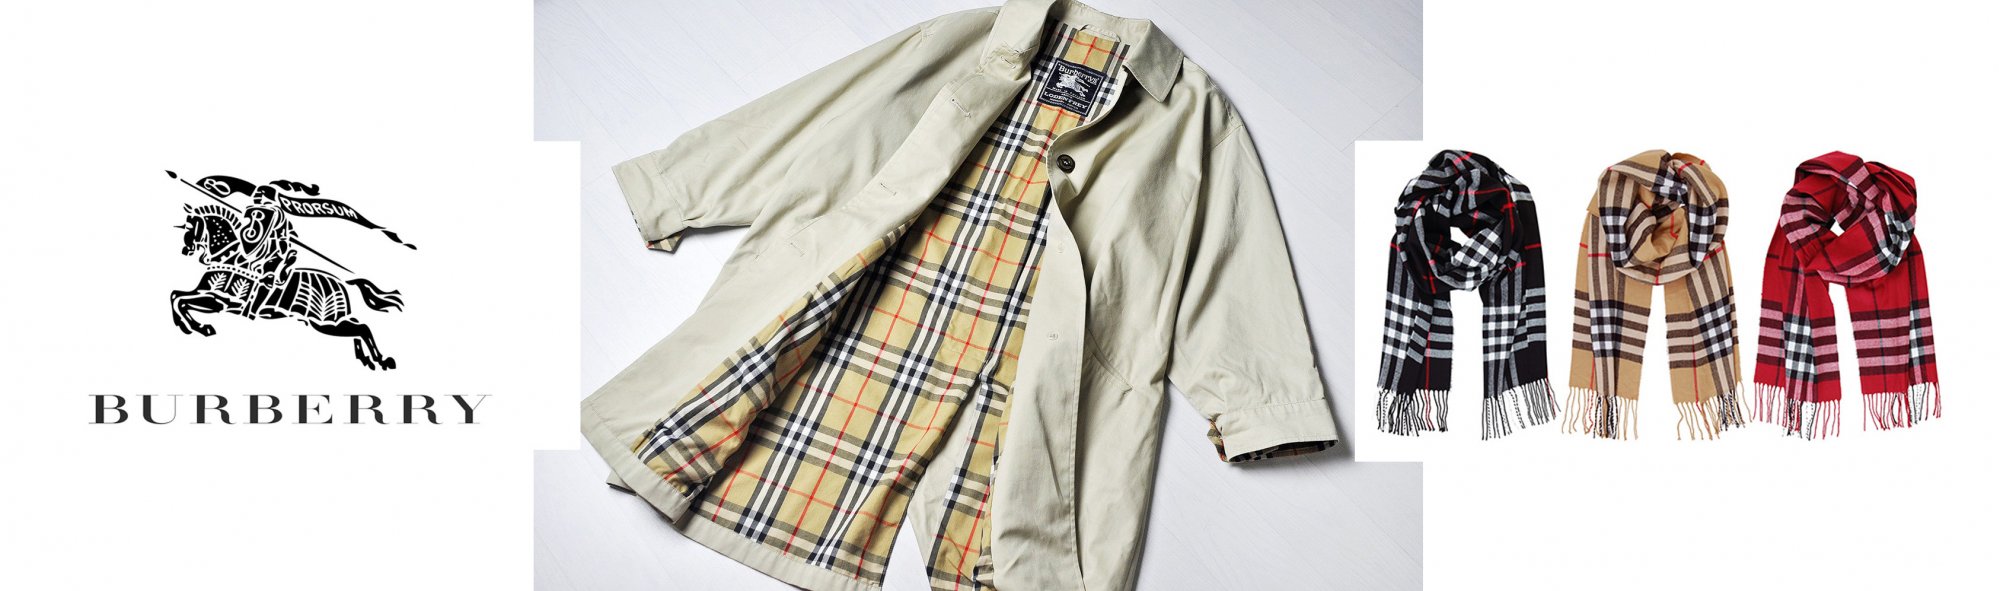 history of Burberry